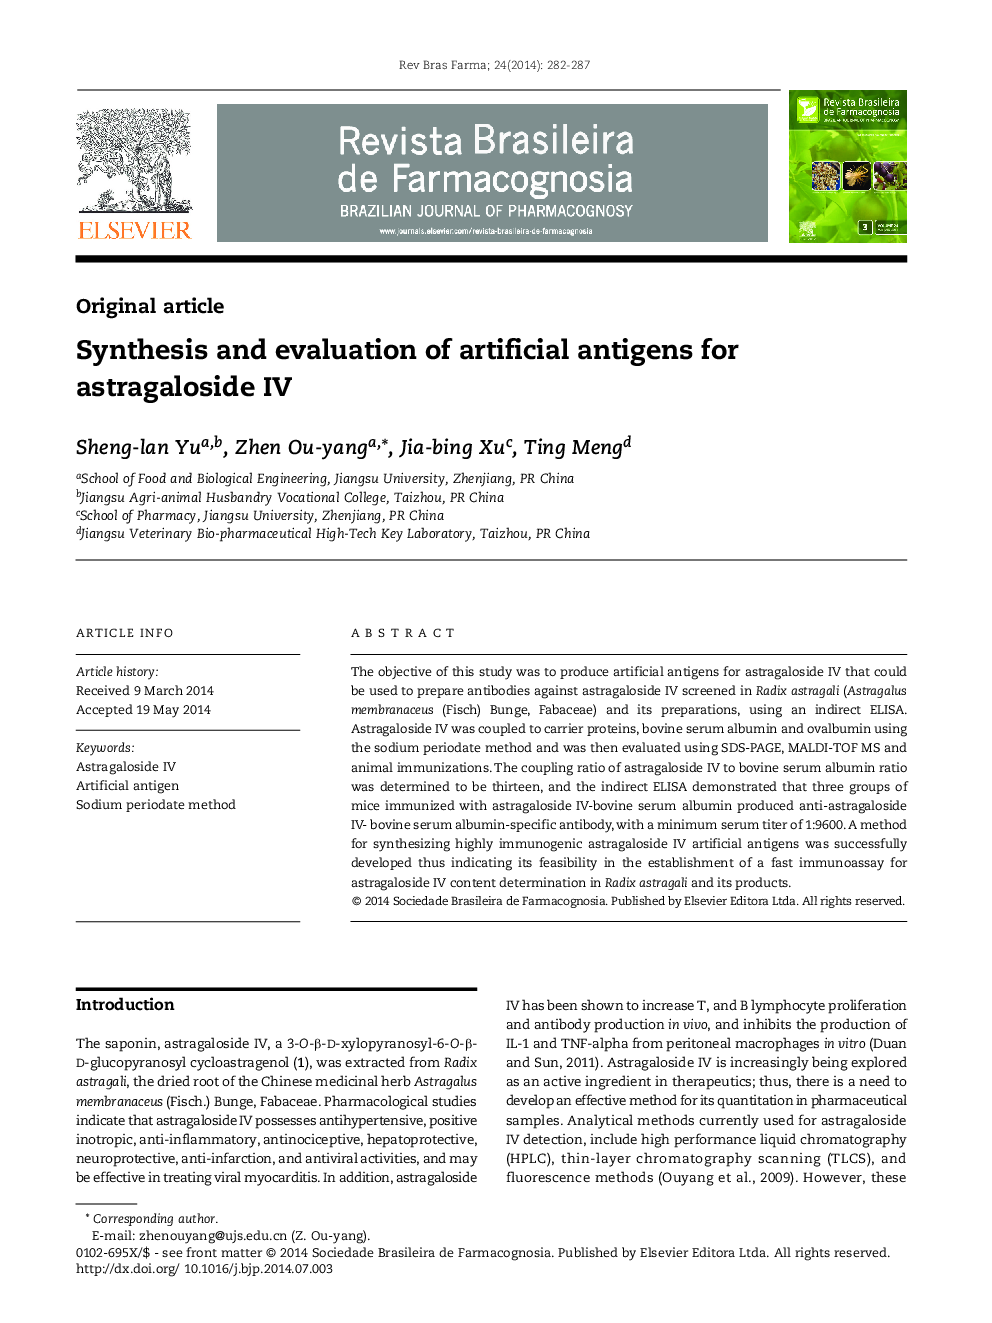 Synthesis and evaluation of artificial antigens for astragaloside IV